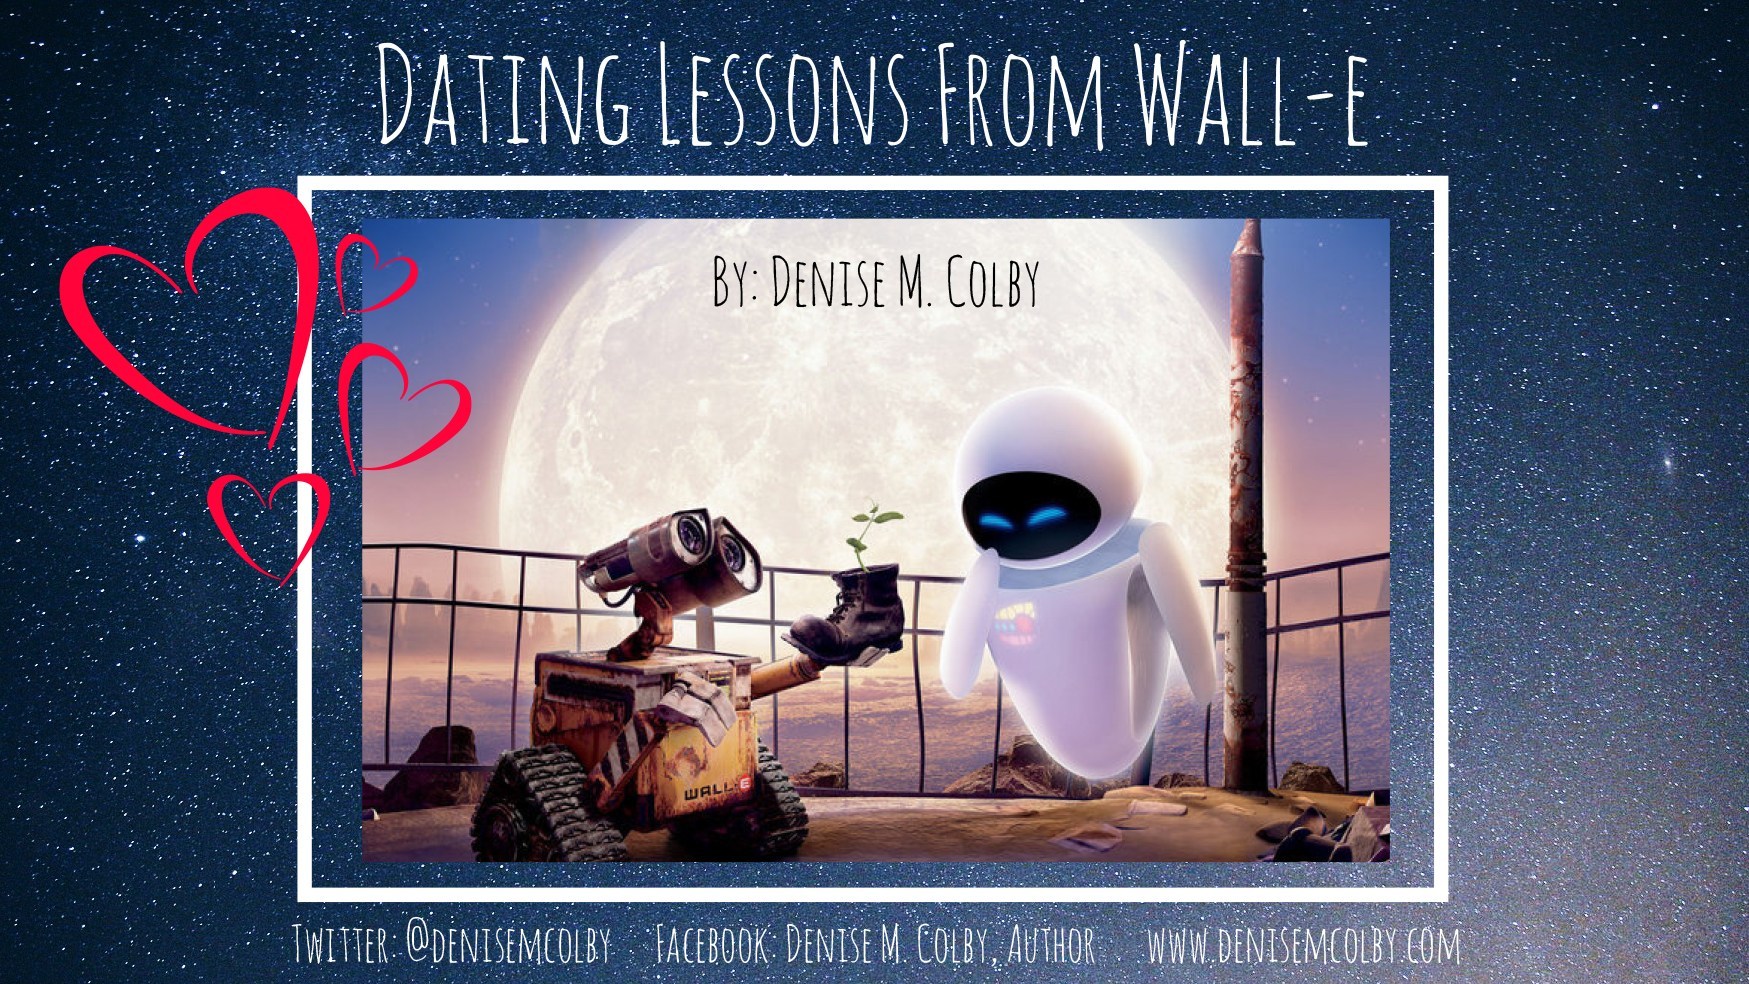 Blog Title Graphic of Wall-E and Eve Dating Lessons from Wall-E by Denise M. Colby 